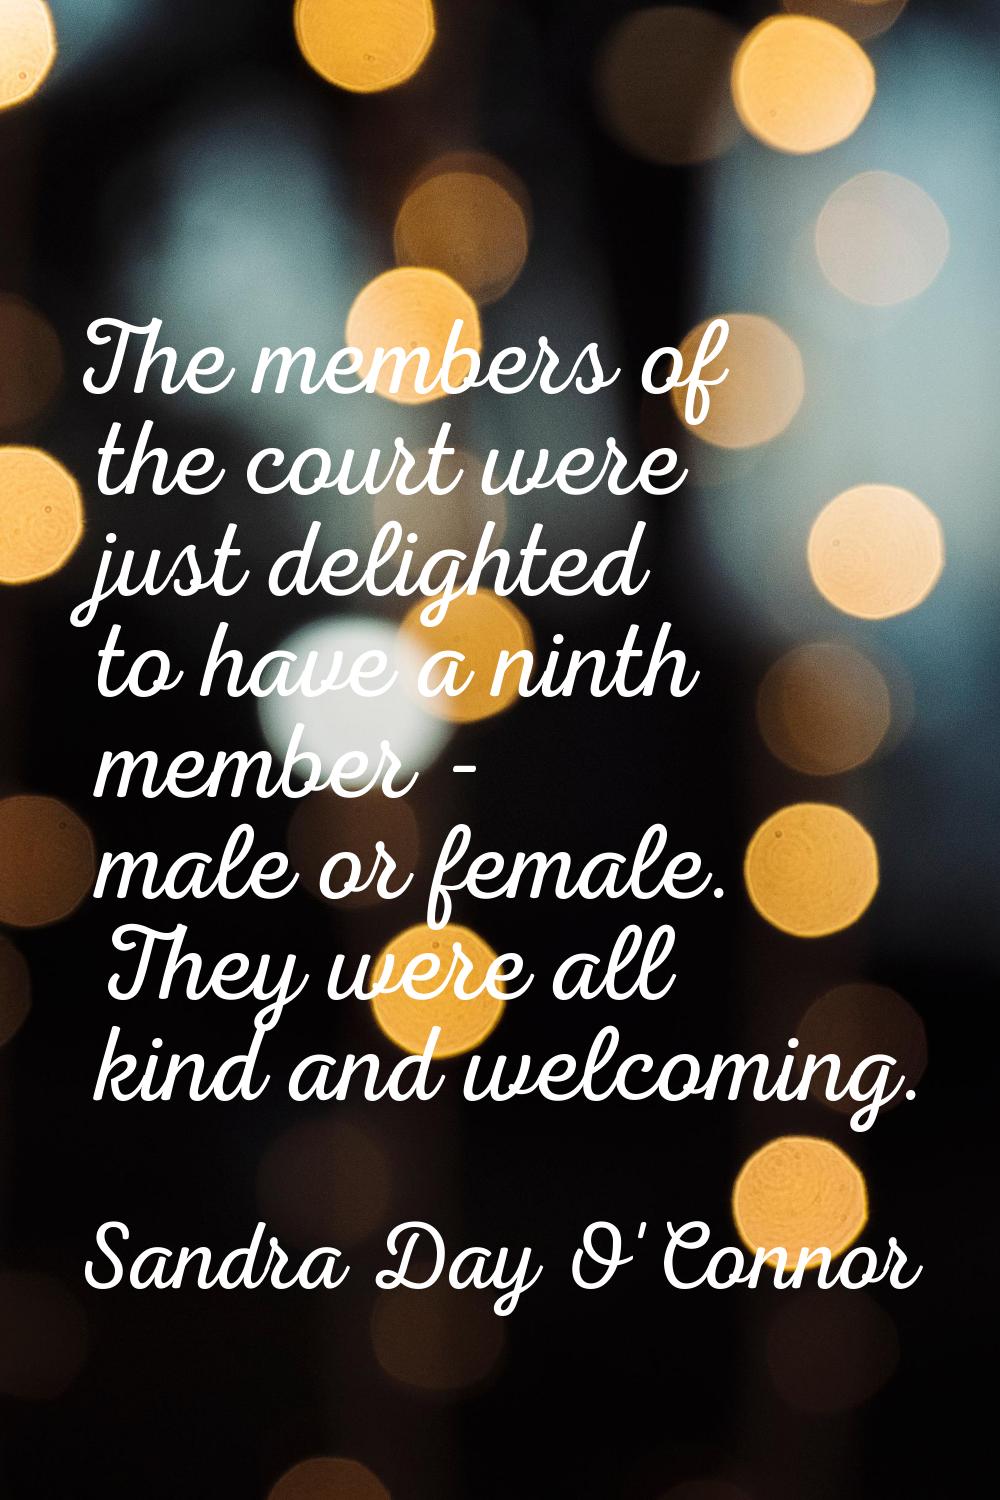 The members of the court were just delighted to have a ninth member - male or female. They were all